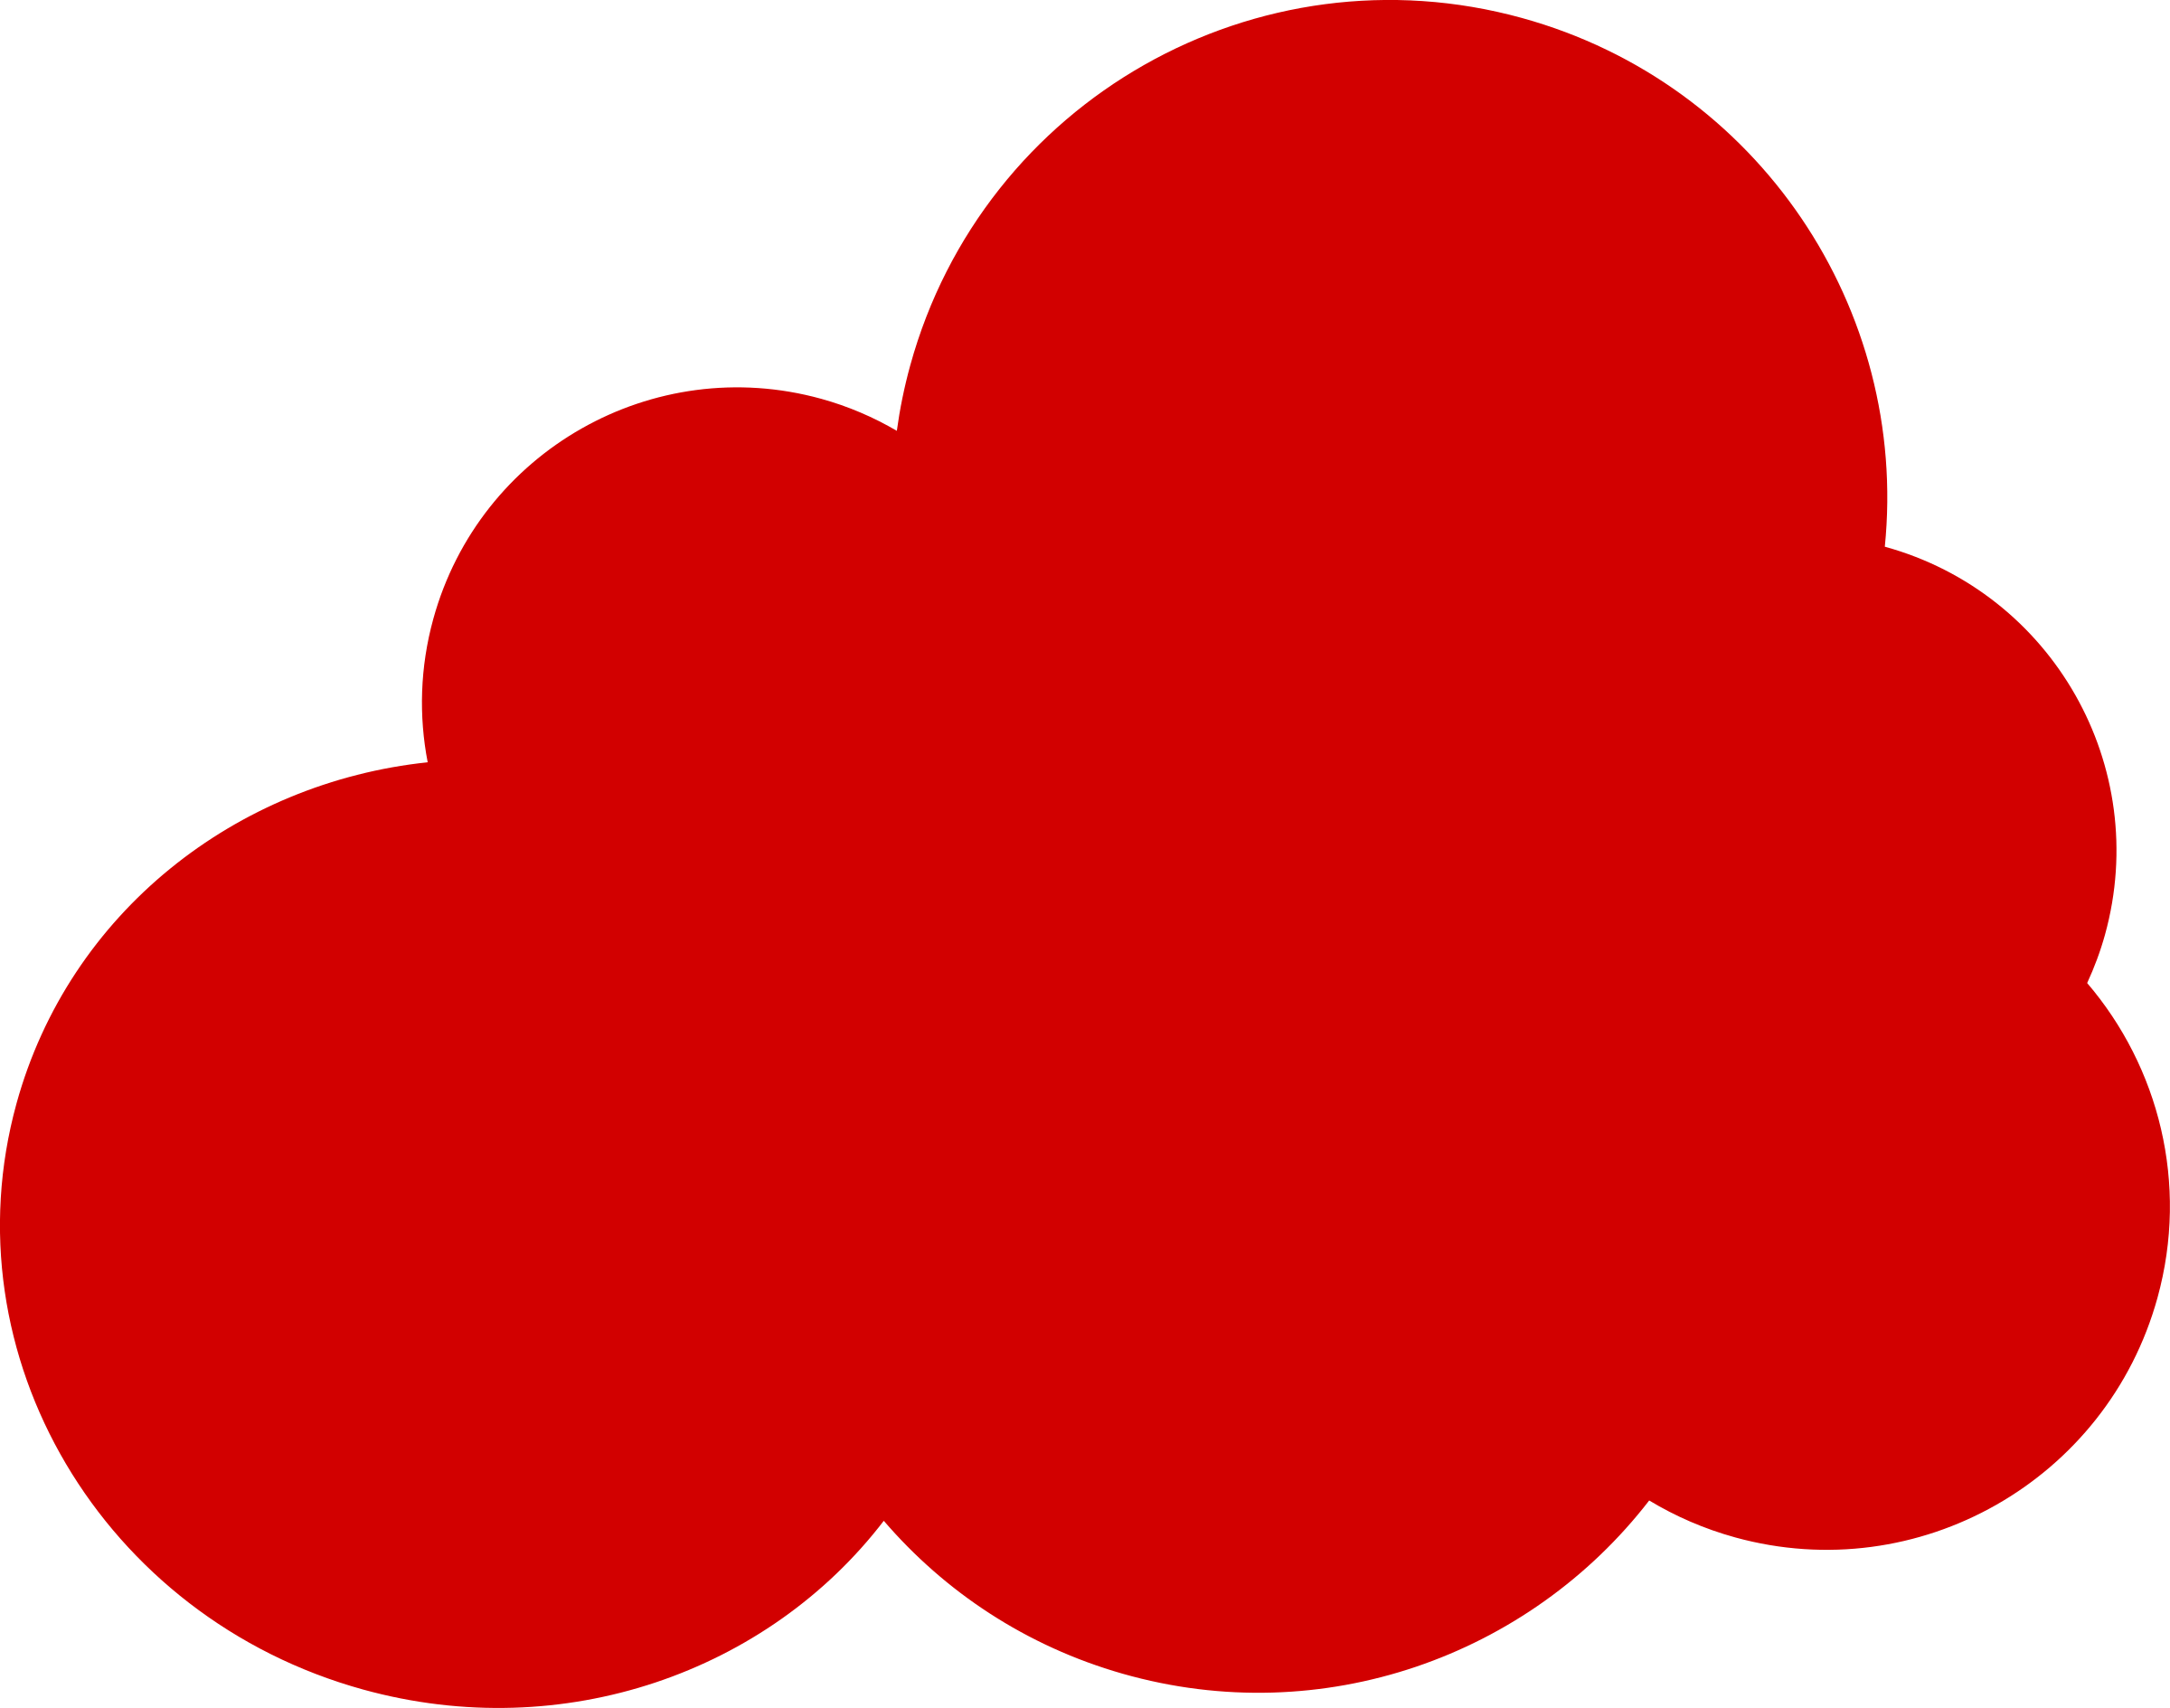 clipart cloud red